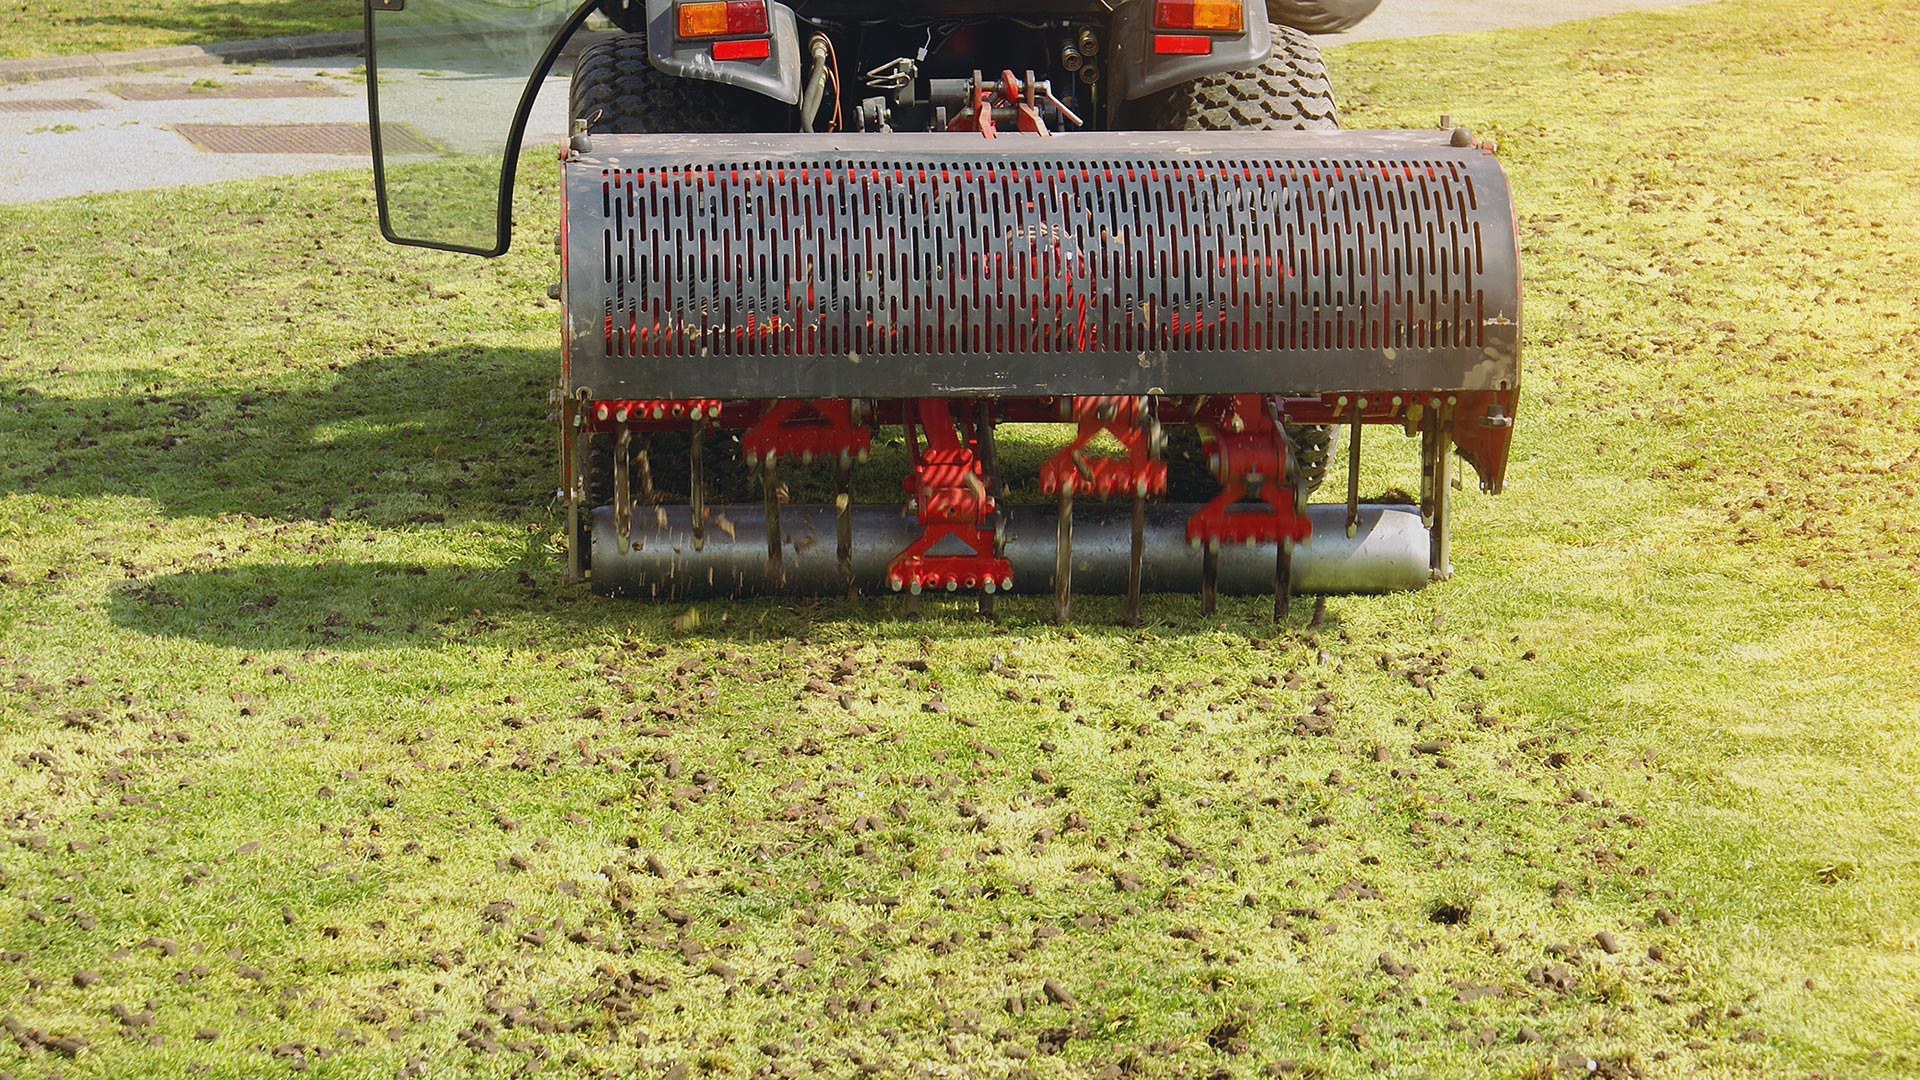 3 Ways to Deal With the Cores of Soil Left on Your Lawn After Aeration